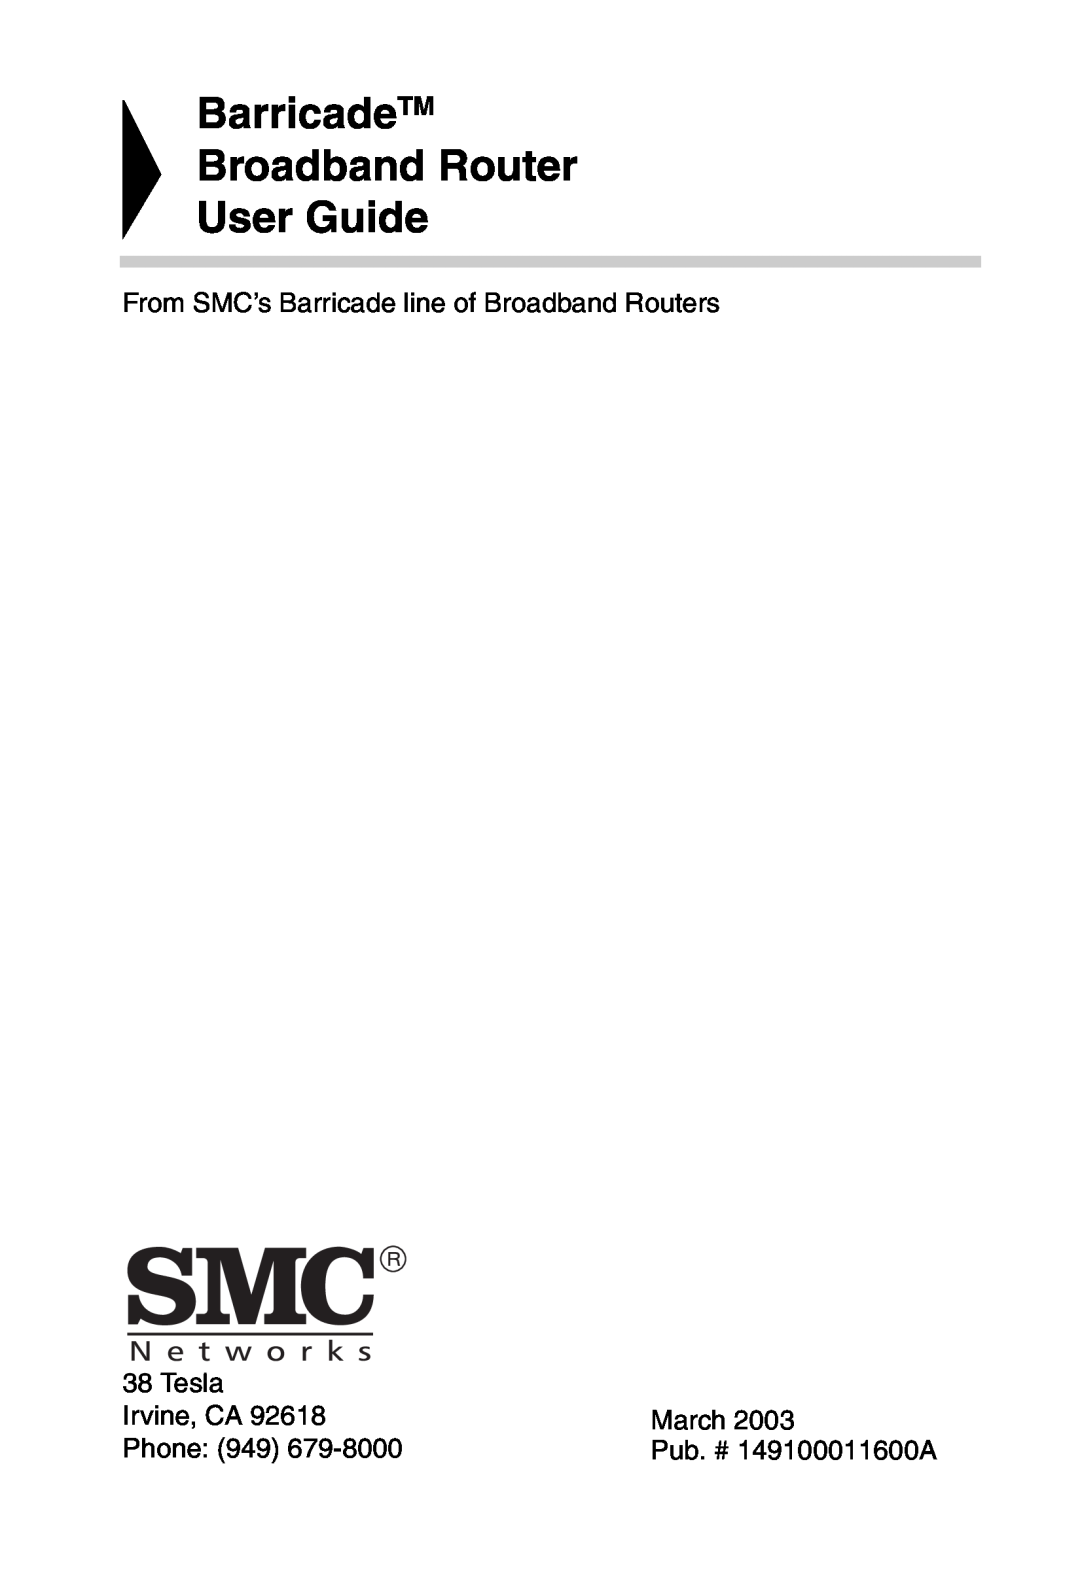 Sharp S M C 7 0 0 4 A B R BarricadeTM Broadband Router User Guide, From SMC’s Barricade line of Broadband Routers, Tesla 